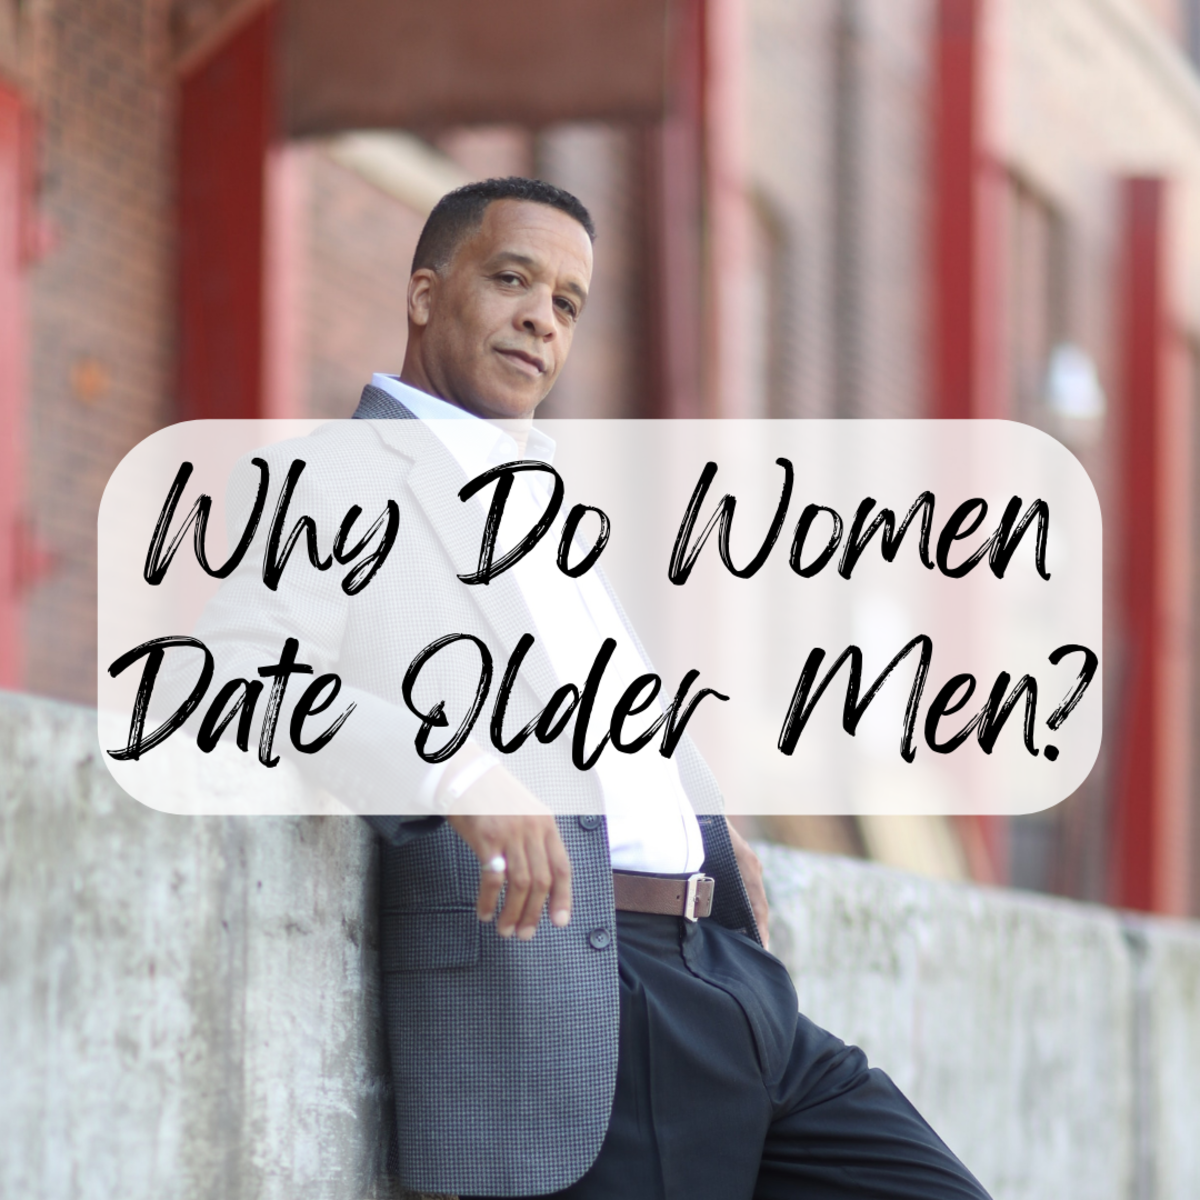 Learn the real reasons behind why many women date older men. This article provides 9 significant pieces of rationale that support women's choices in choosing an older guy.